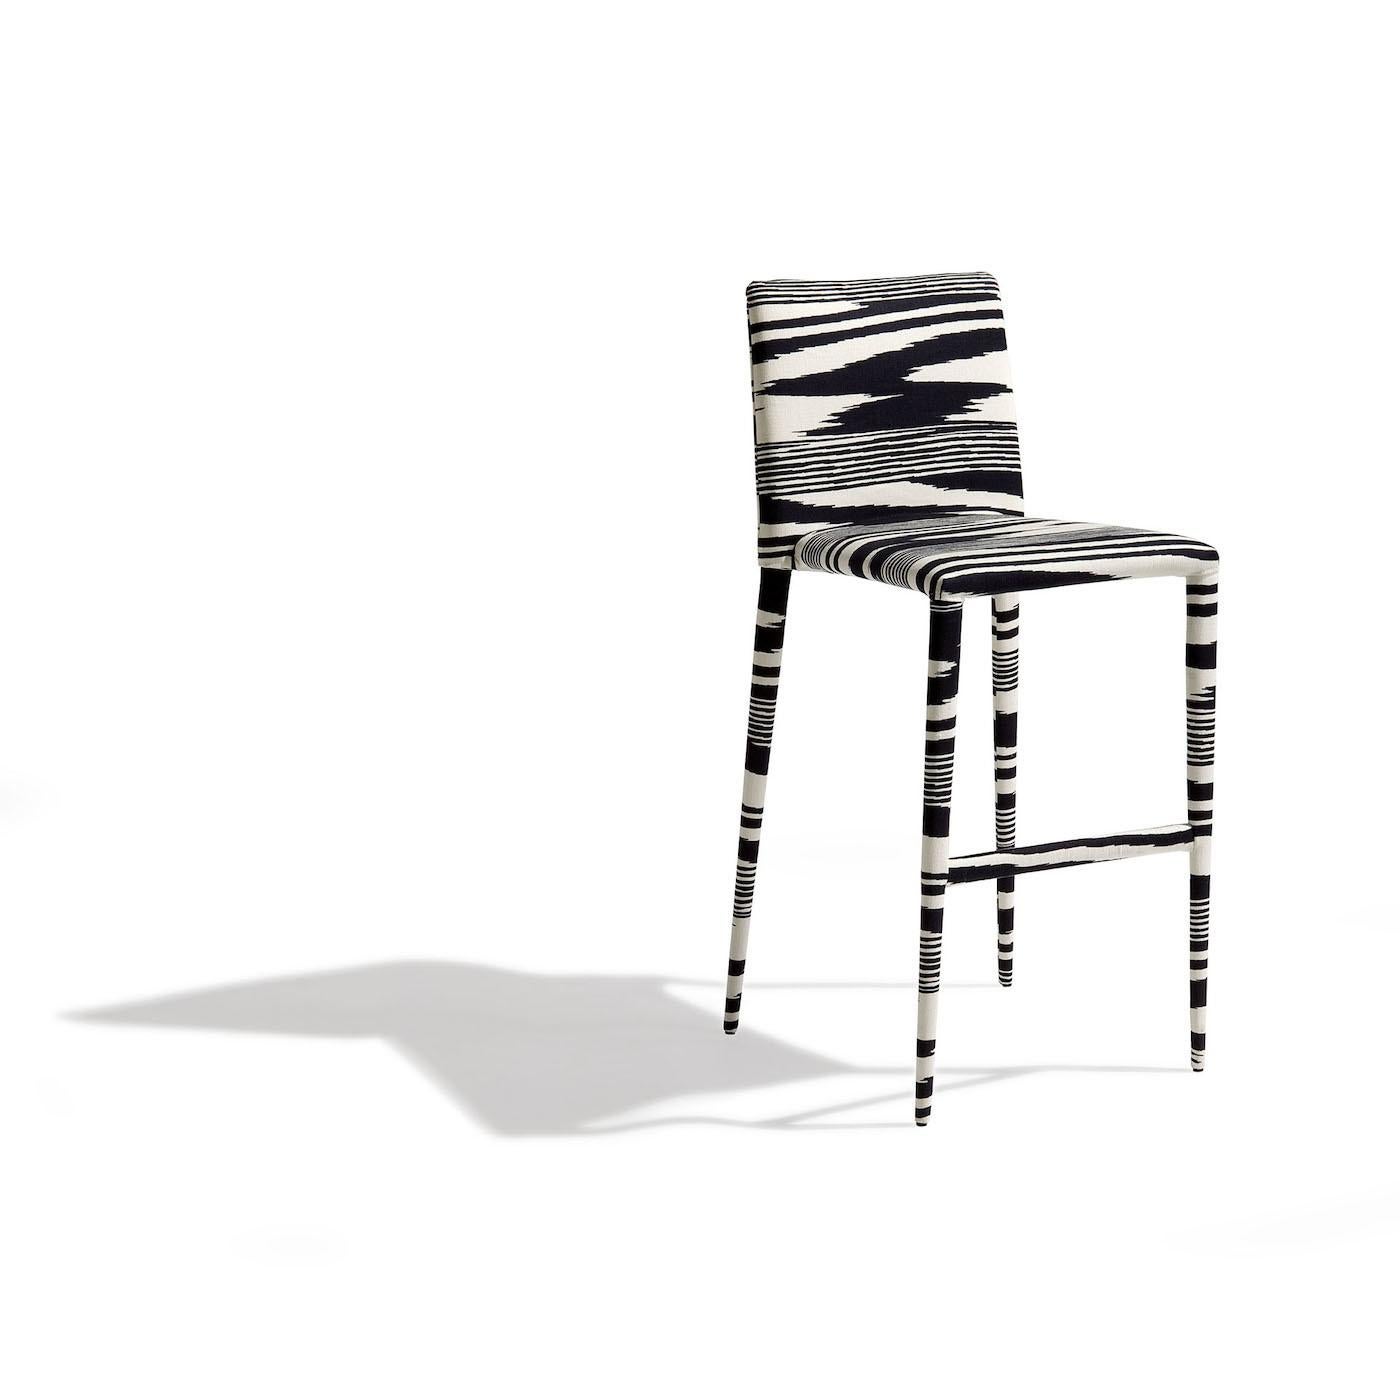 An endearing and comfortable combination of sleek frame and highly graphic pattern, this stool will be the perfect accent piece around a kitchen island or bar console in a modern, monochromatic interior. The frame is made of steel with multi-density